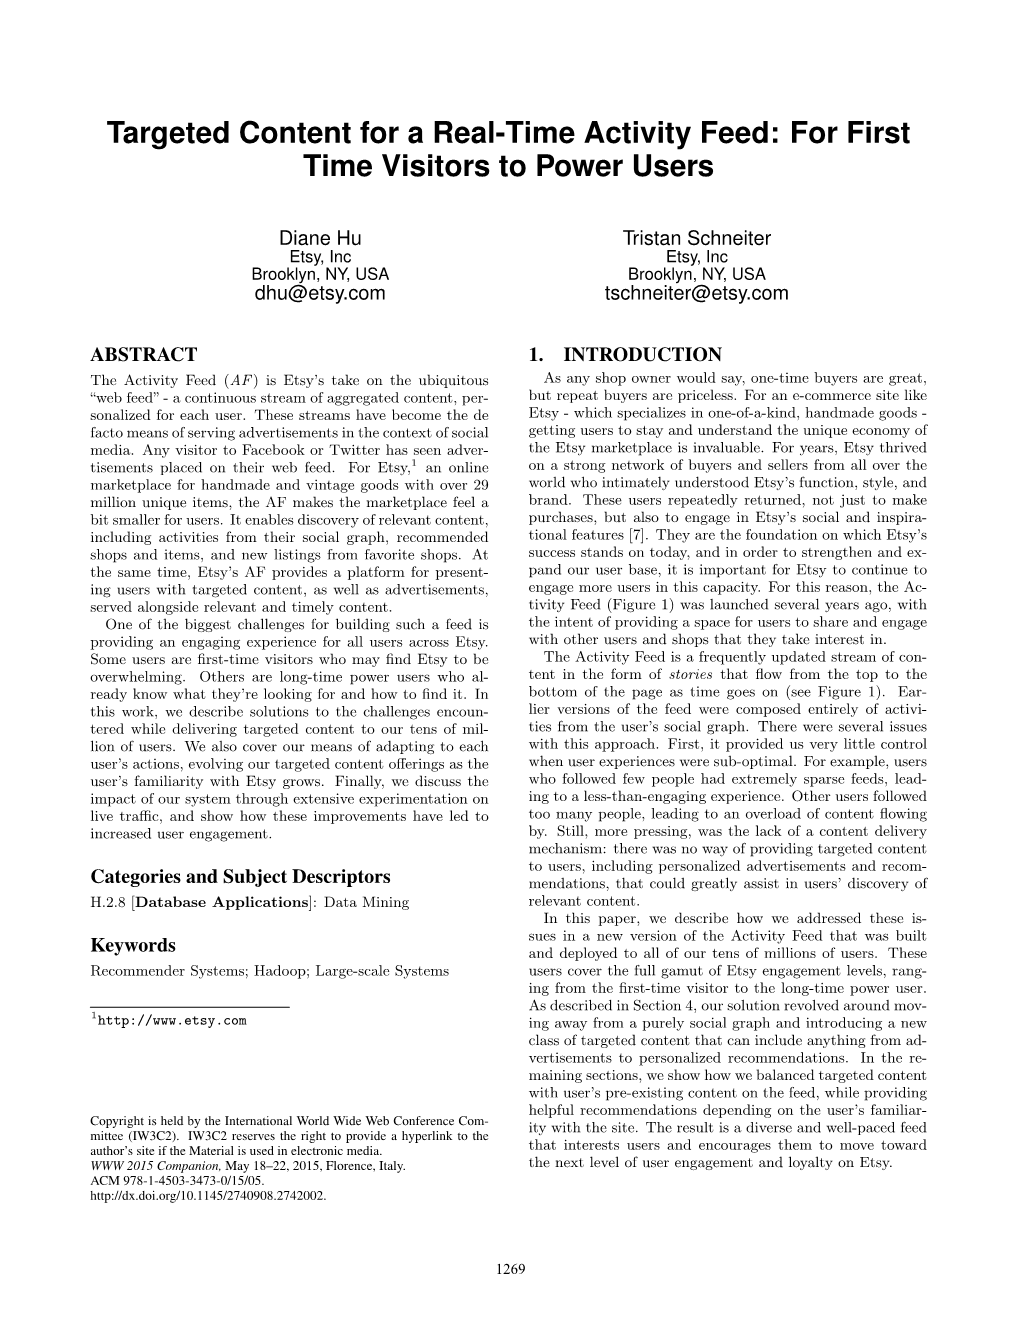 Targeted Content for a Real-Time Activity Feed: for First Time Visitors to Power Users